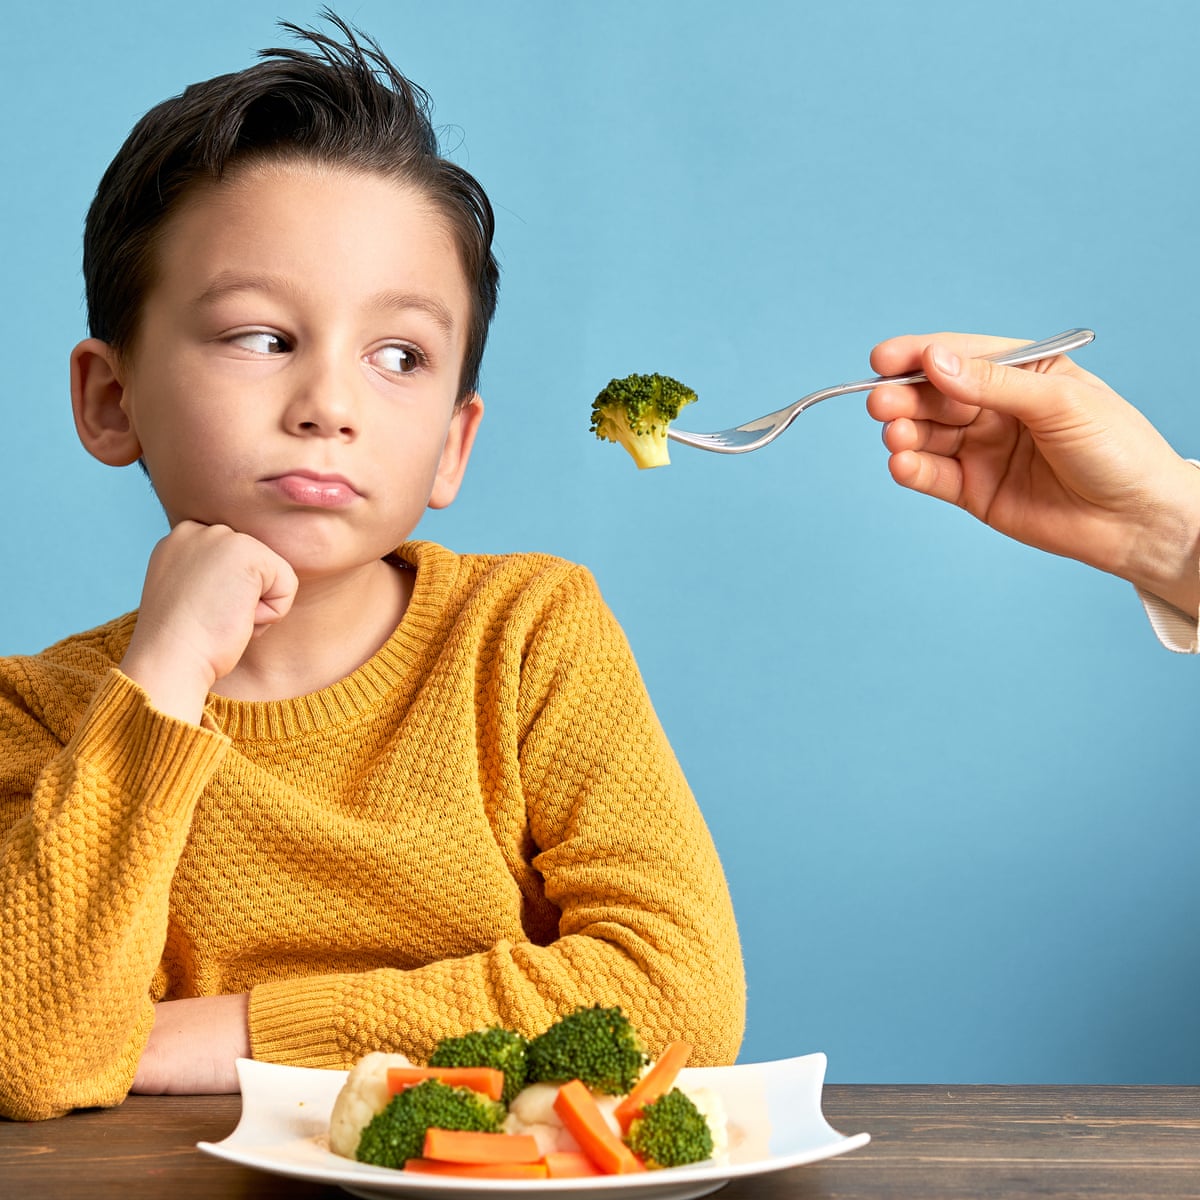 Five ways to get your children to eat vegetables | Parents and ...